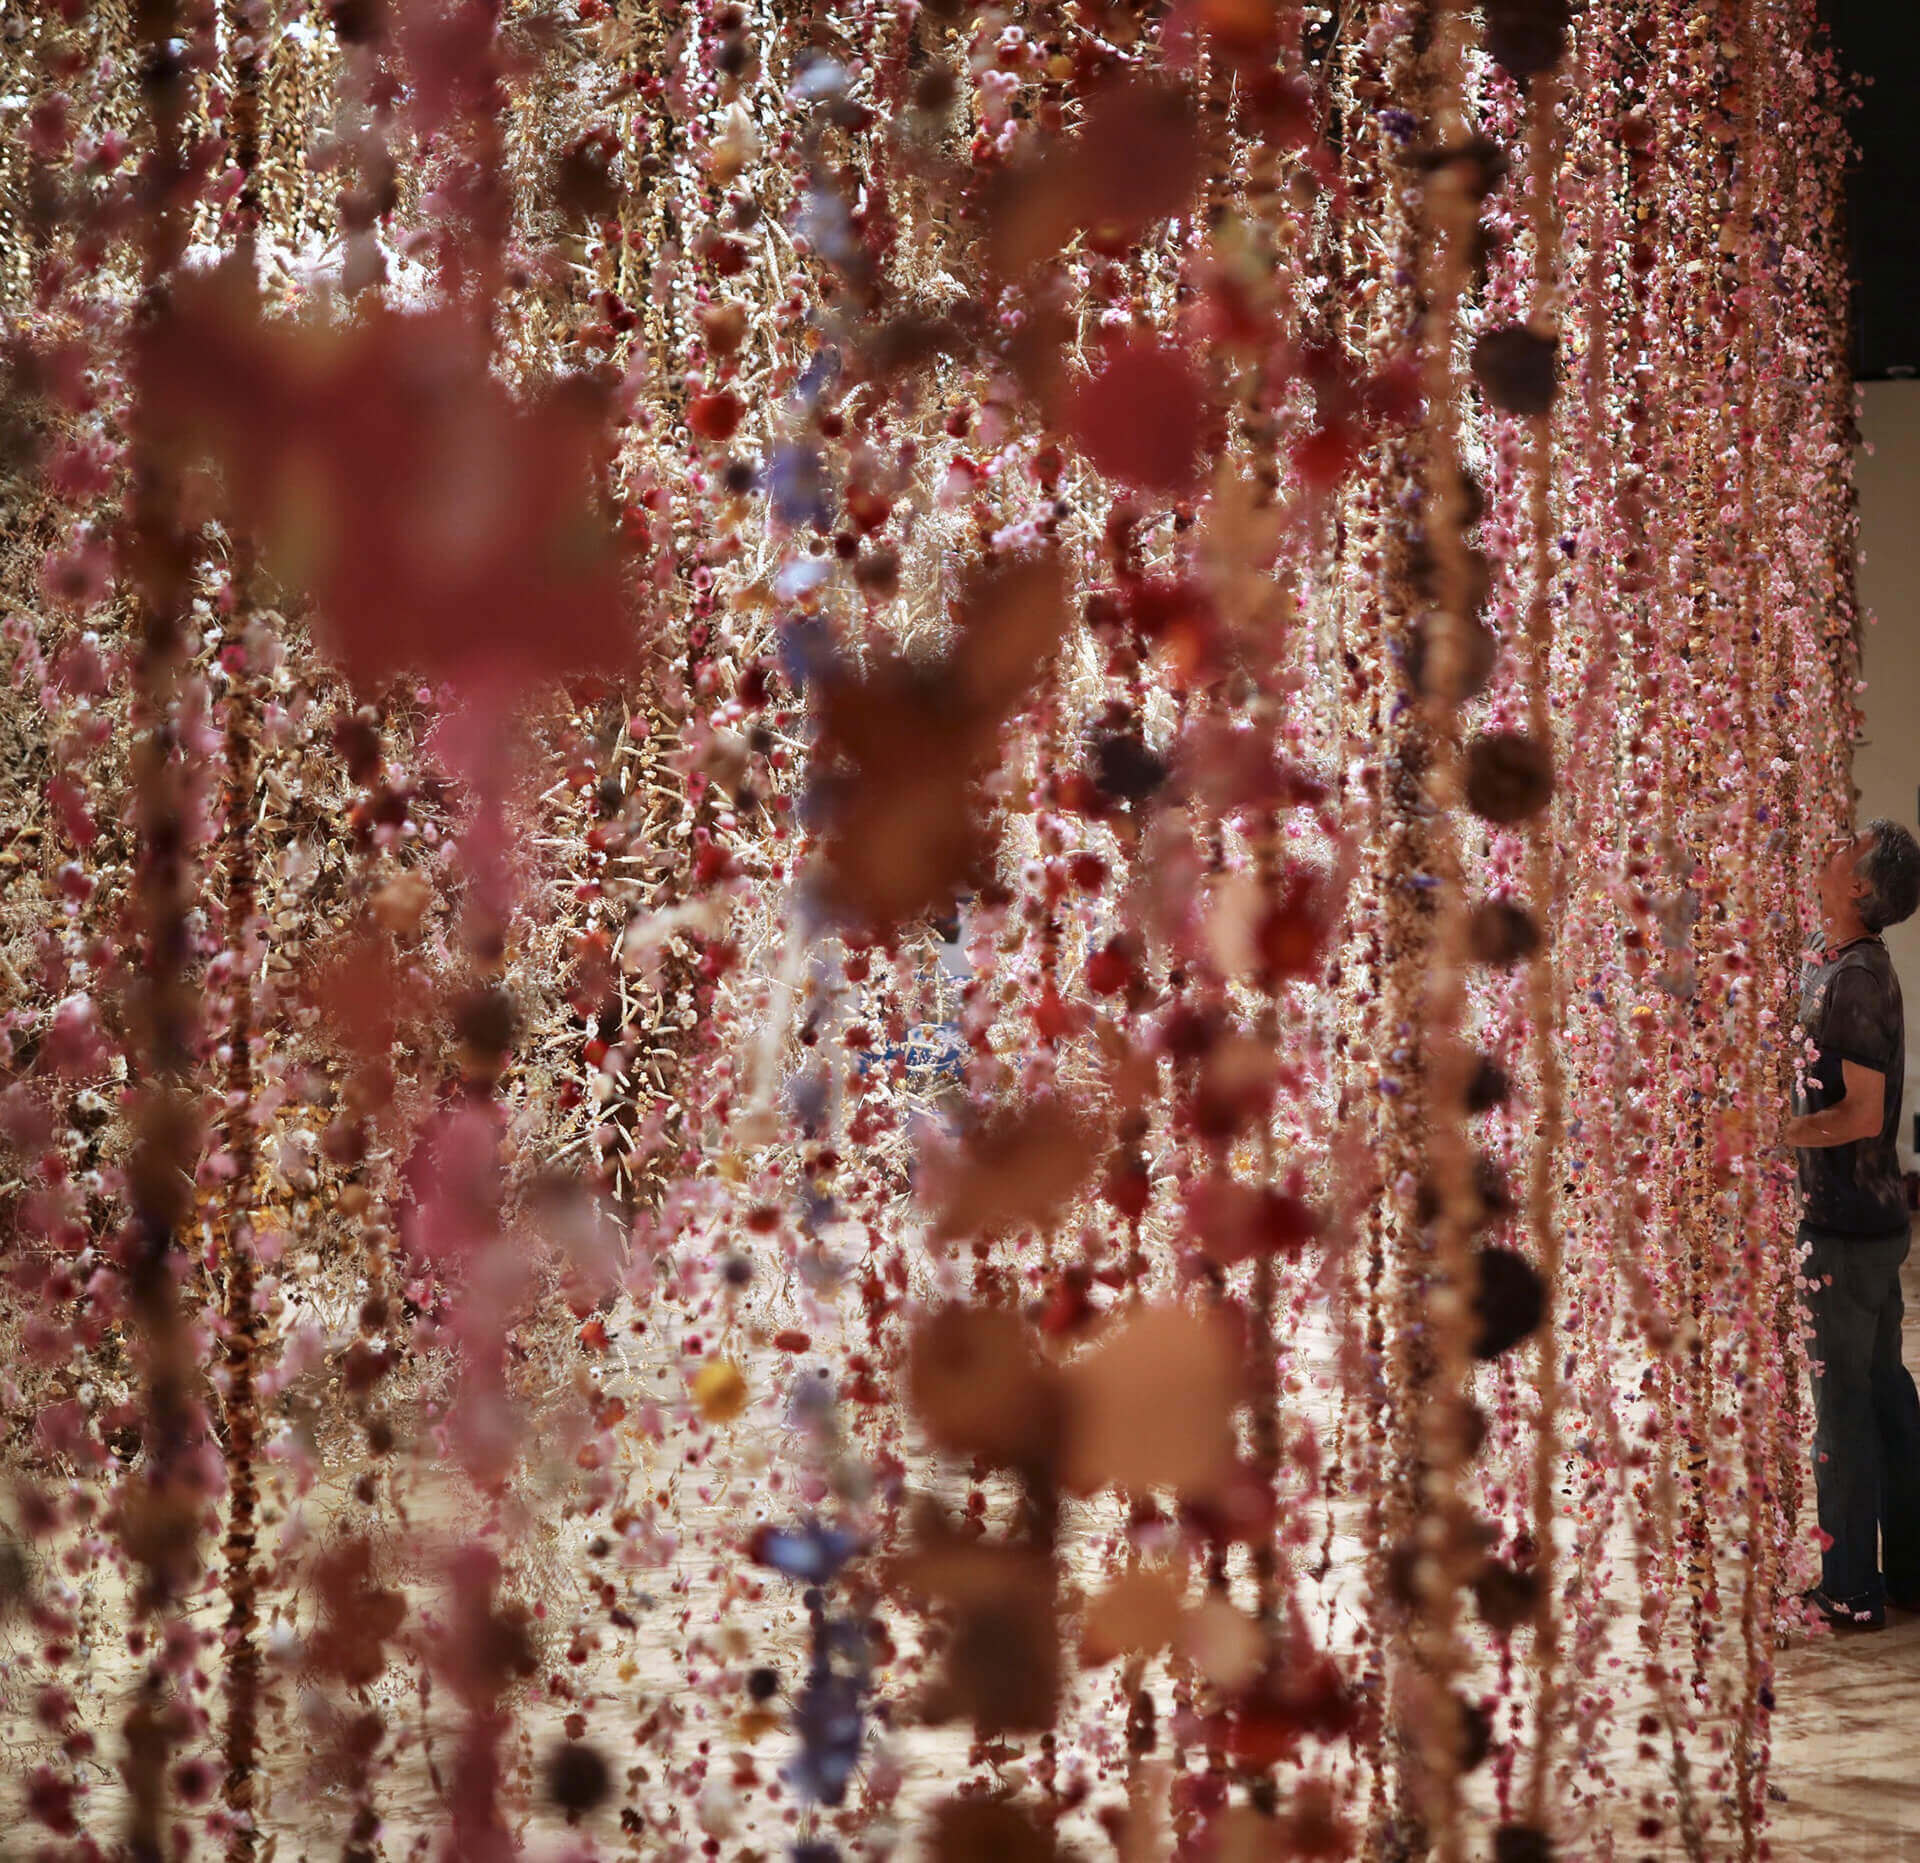 REBECCA LOUISE LAW: THE JOURNEY